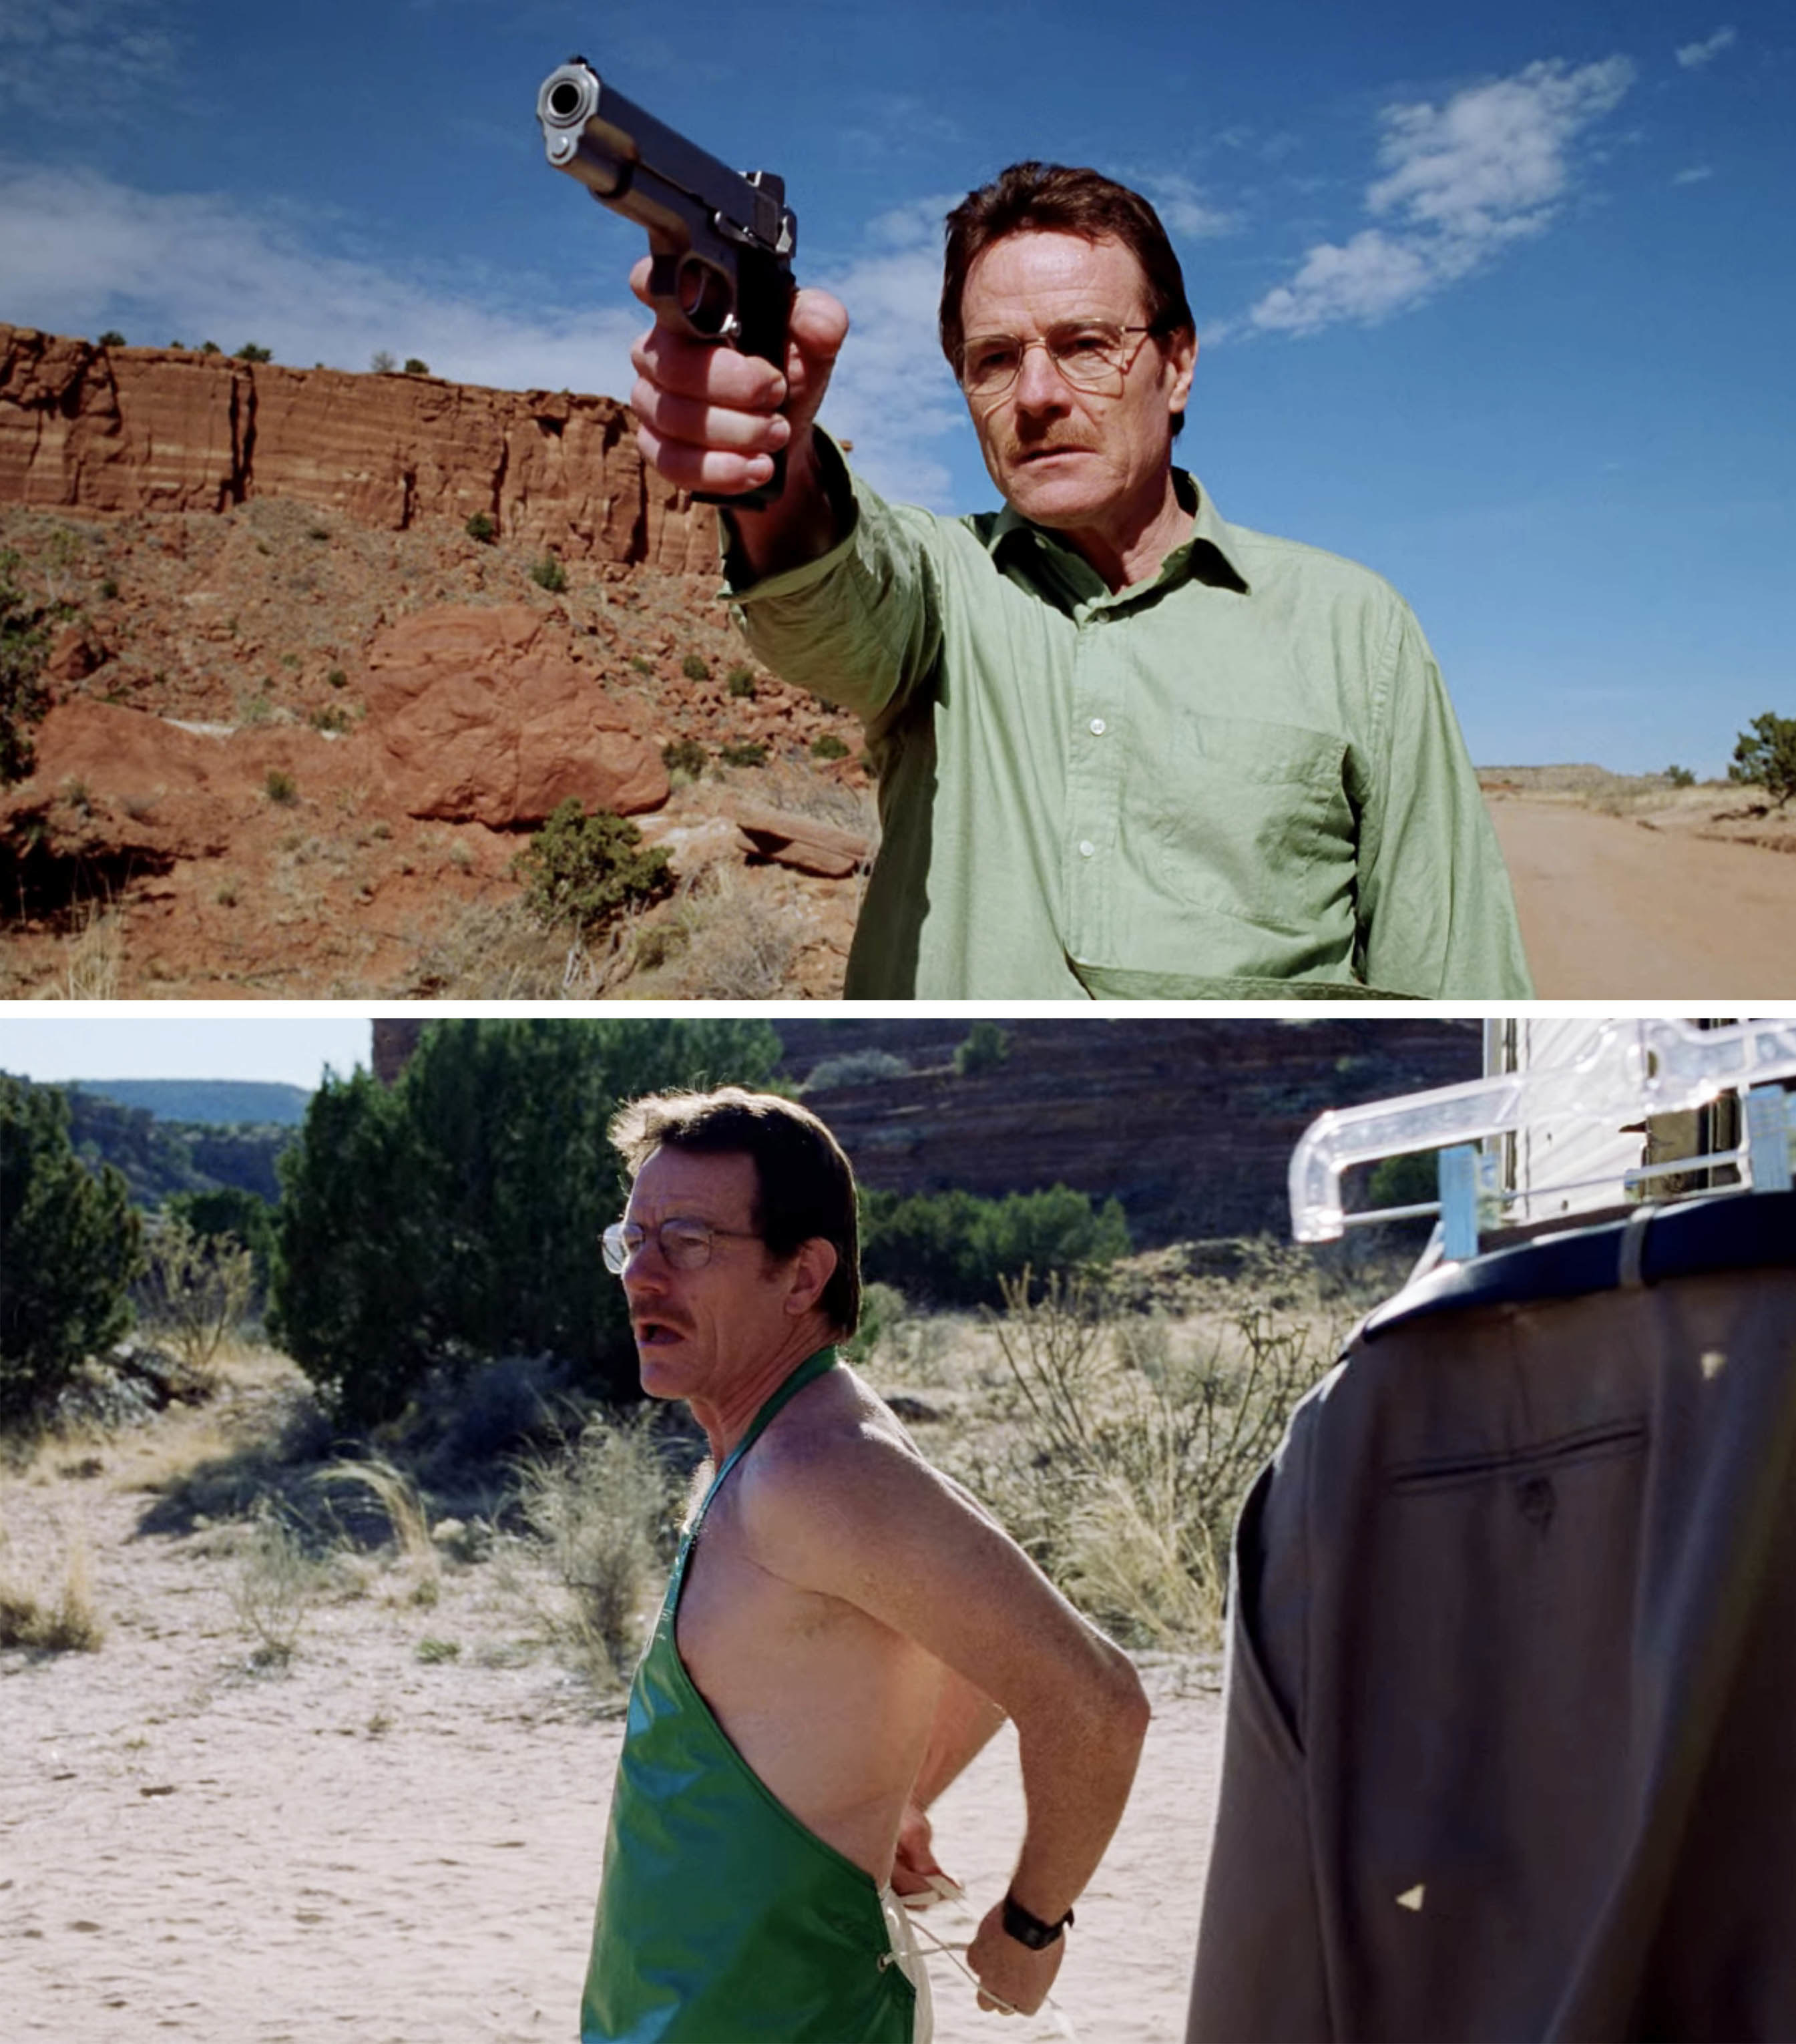 Walter White holding a gun; Walter putting an apron on in the desert